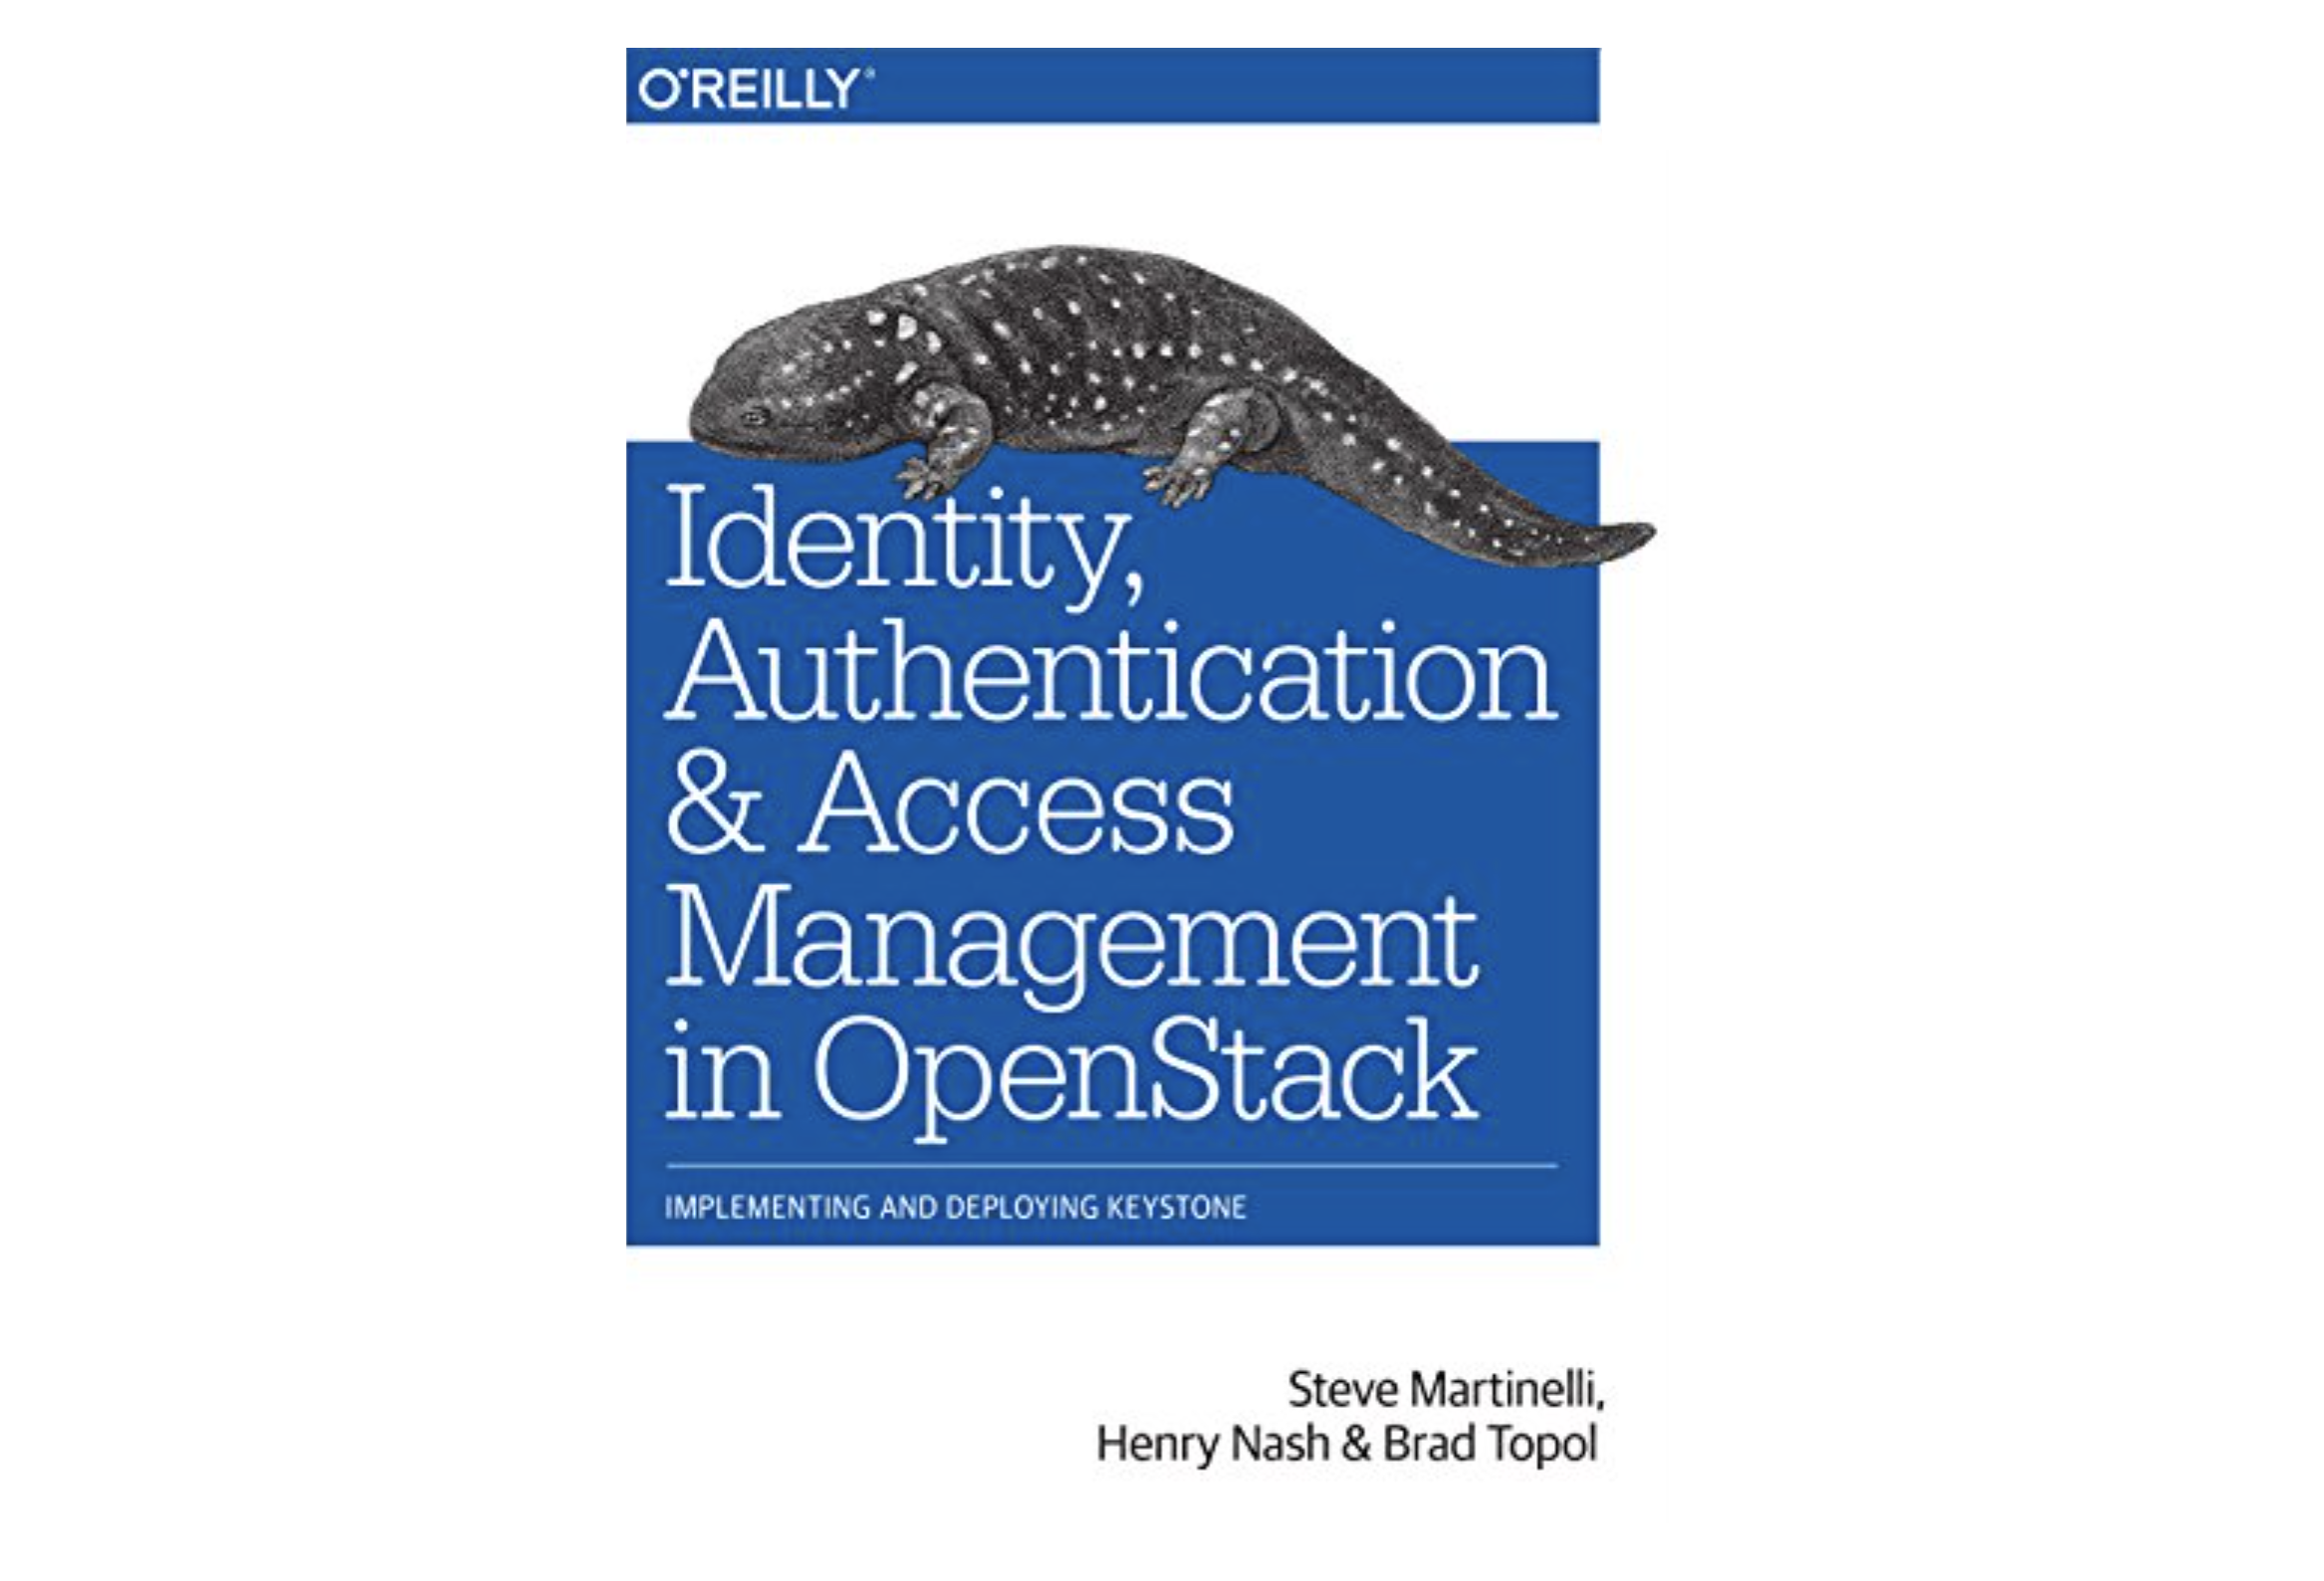 Access Management in OpenStack